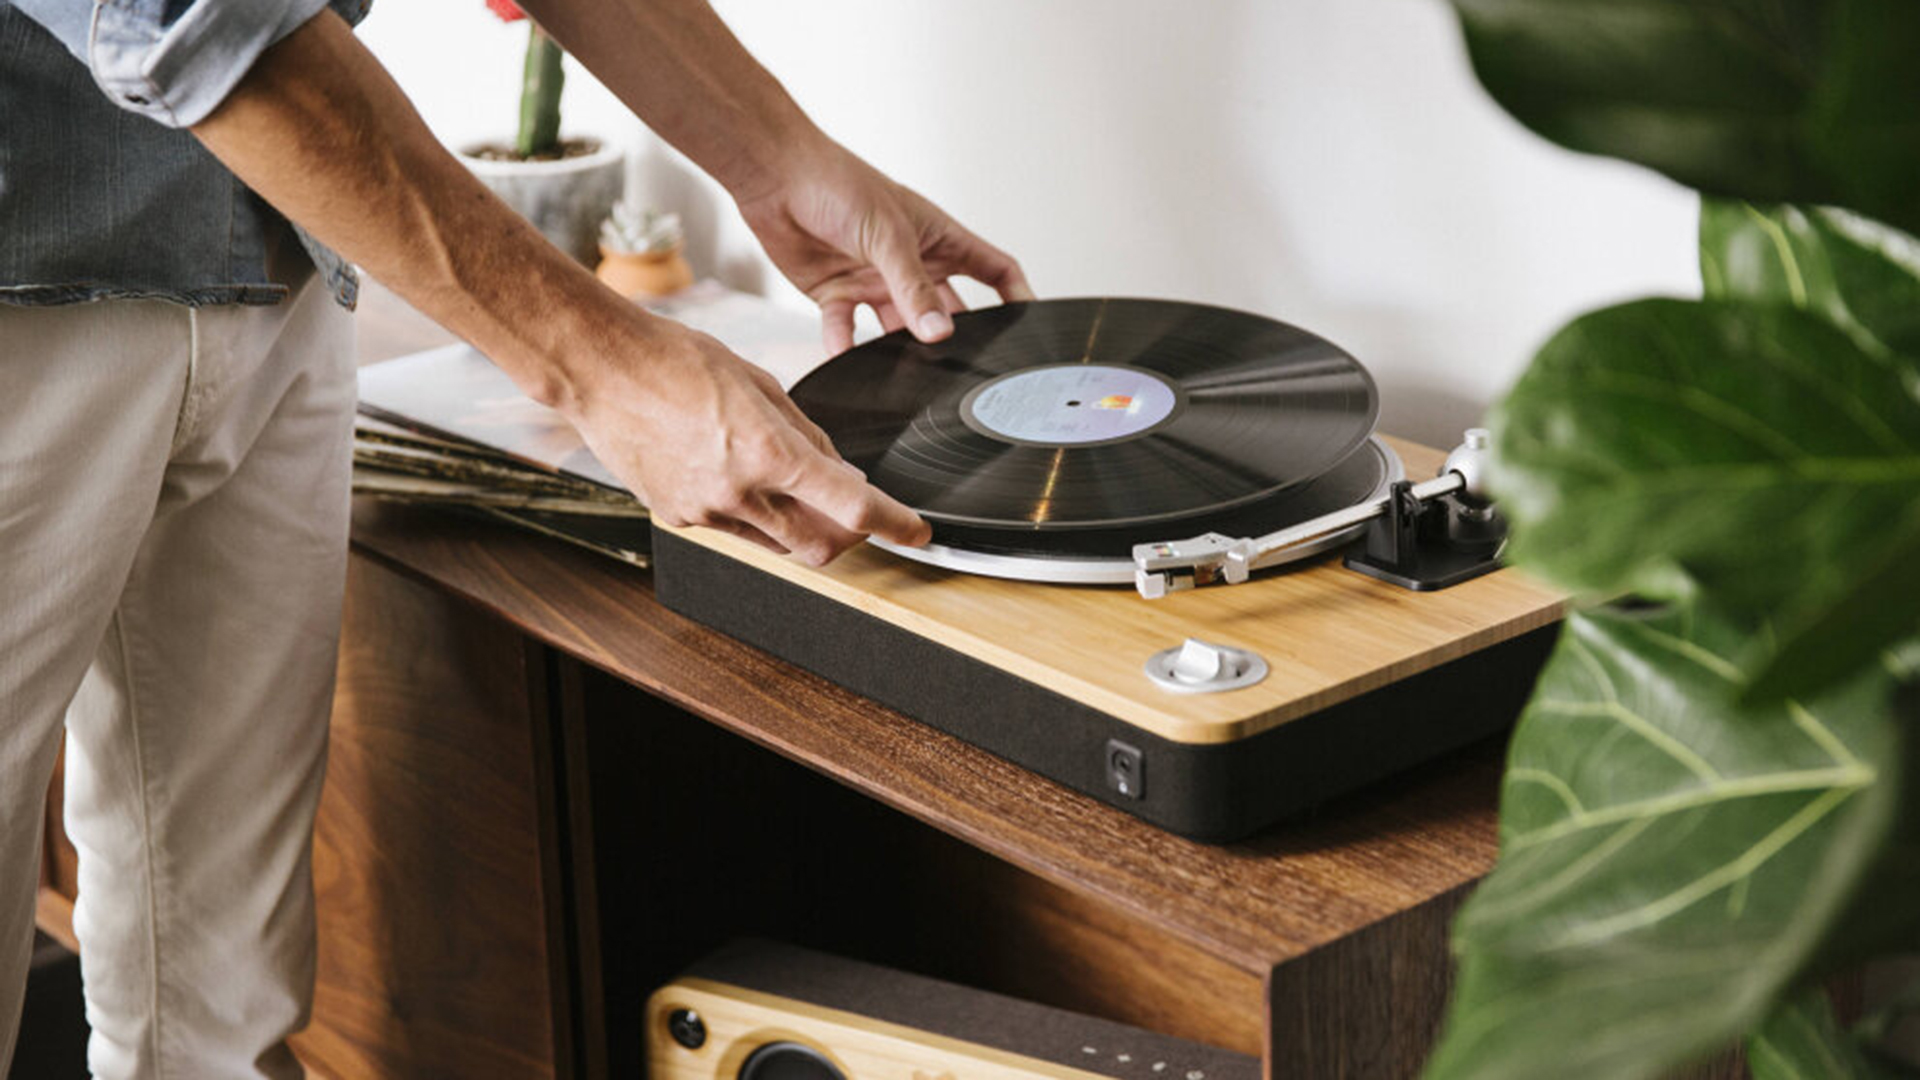 House of Marley Stir It Up Turntable Review | Top Ten Reviews